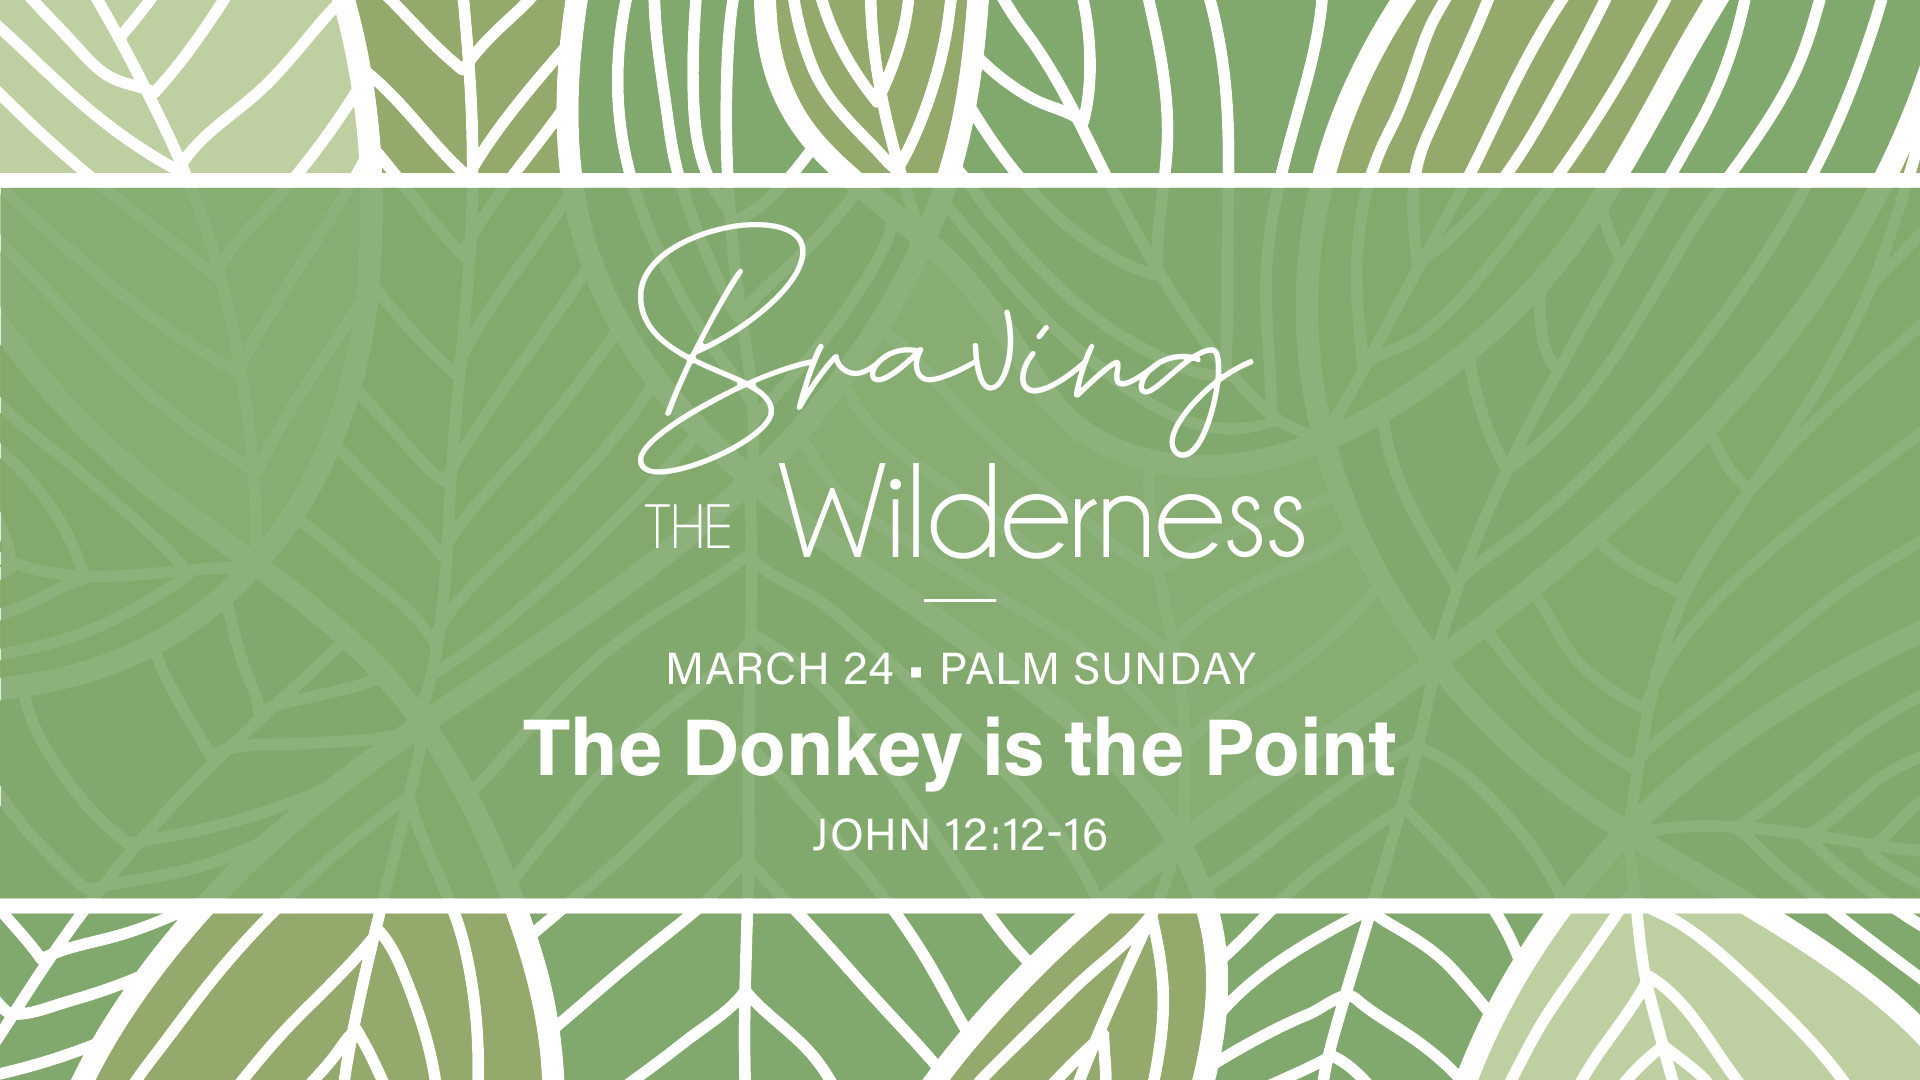 March 24 - The Donkey is the Point